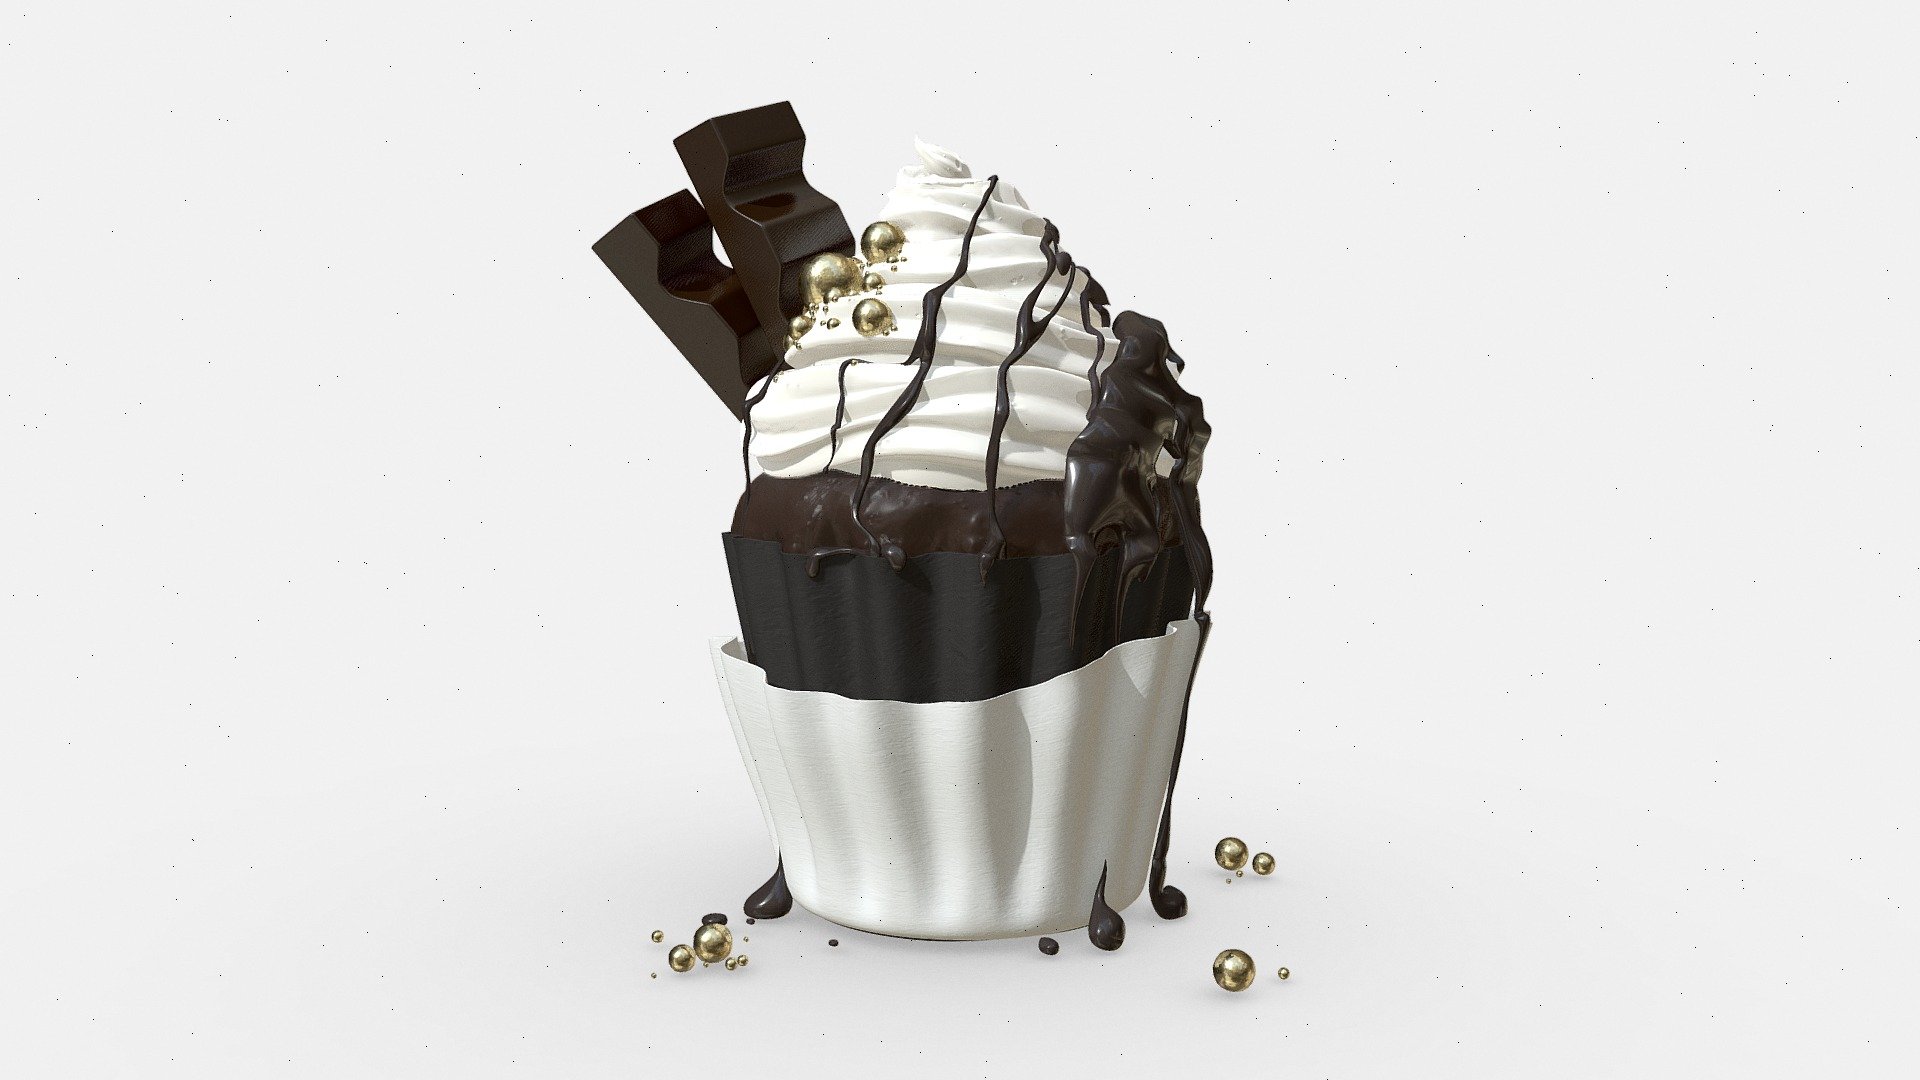 3D Model of vanilla flavored cupcake, made with Blender 3d model